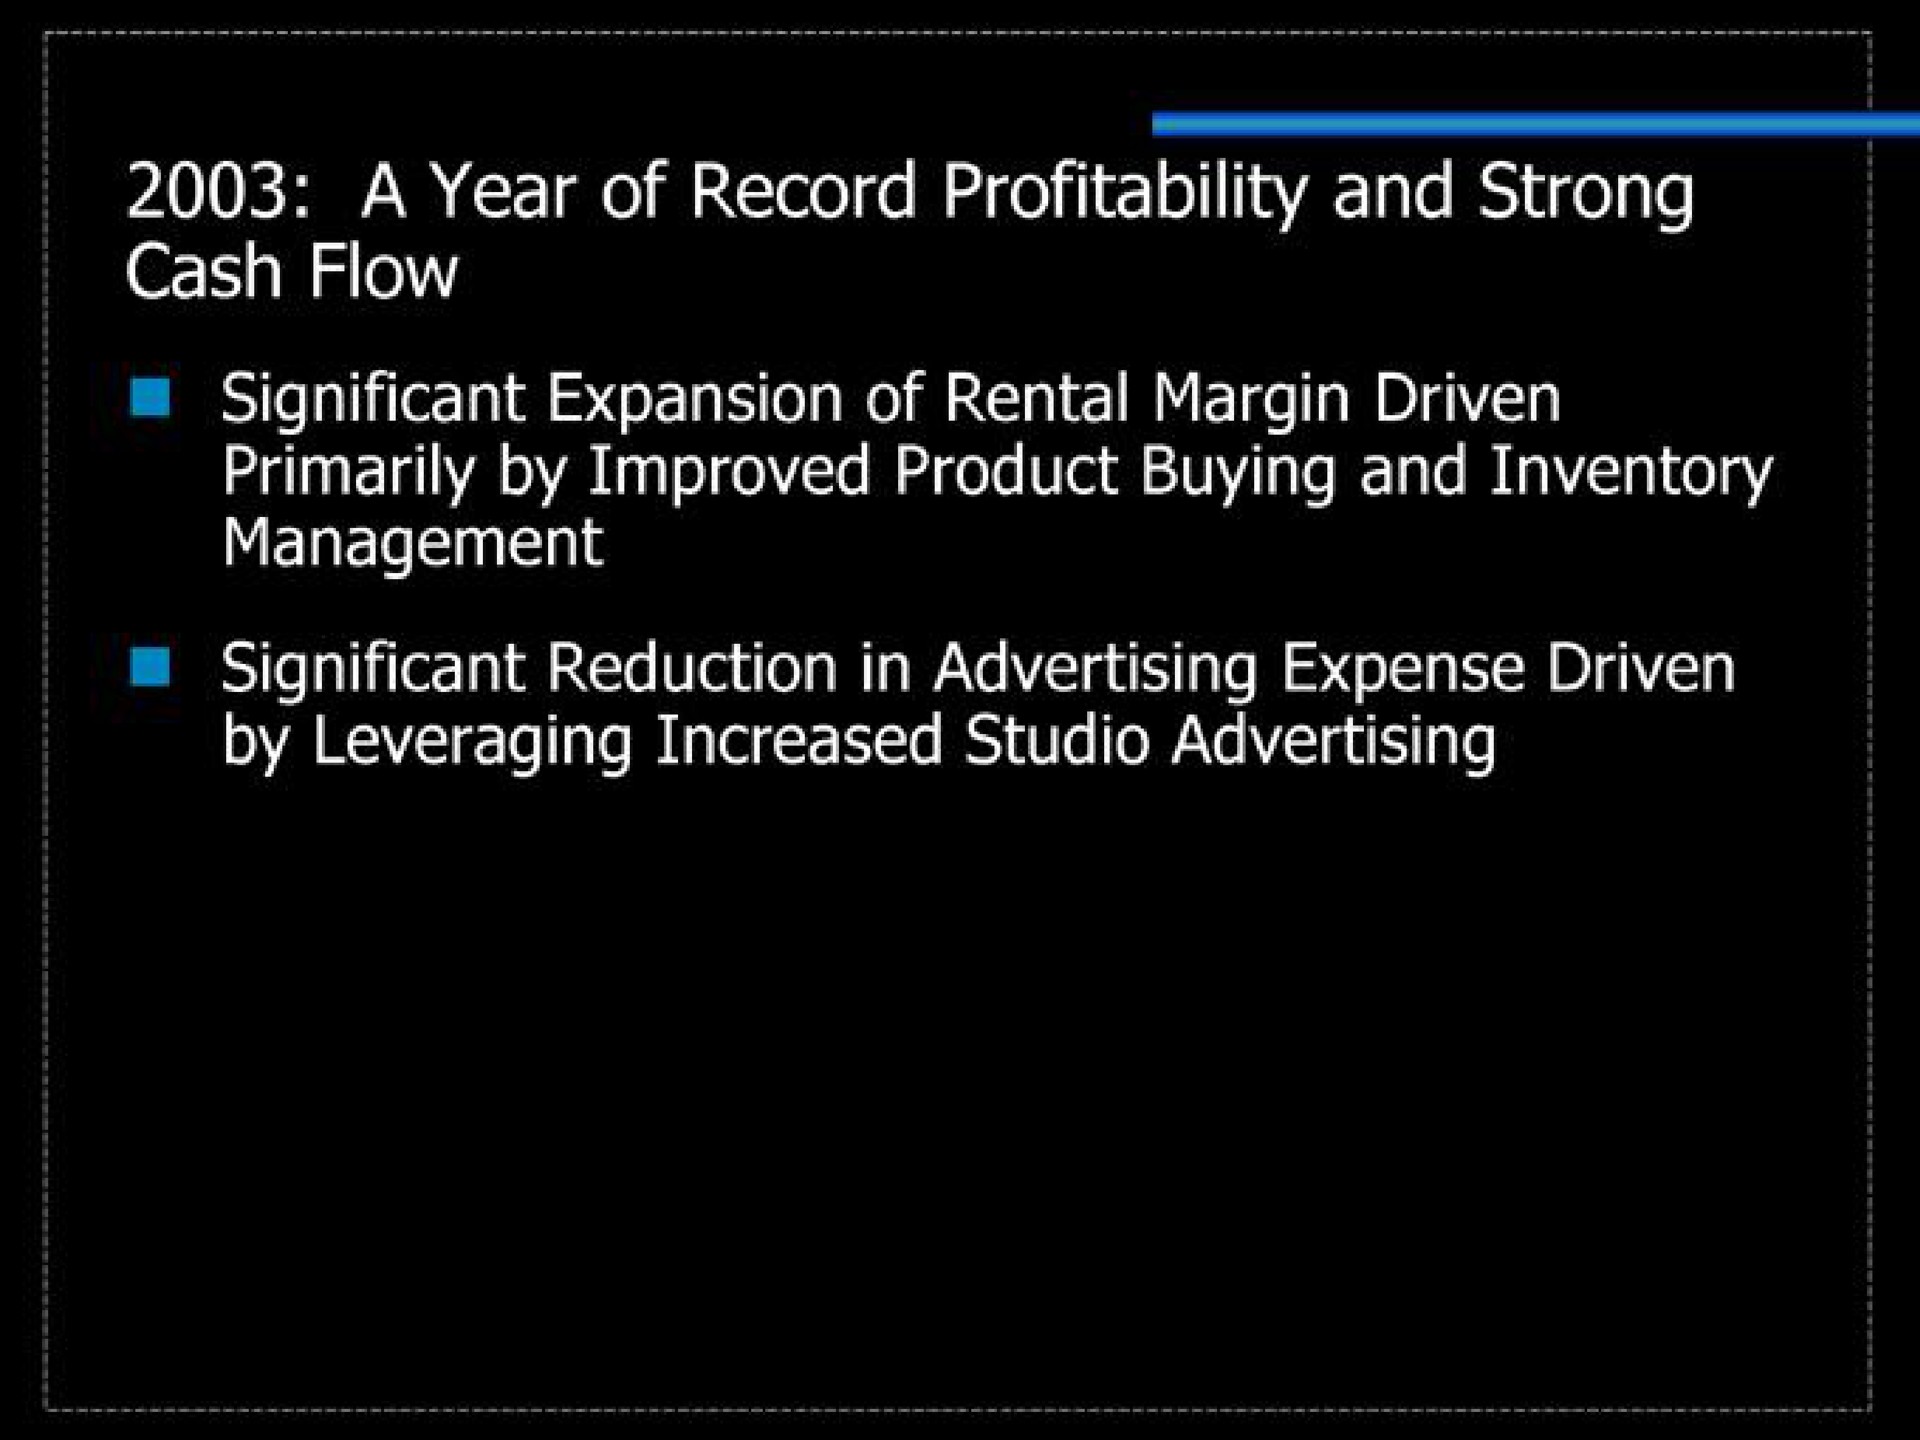 a year of record profitability and strong cash flow | Blockbuster Video